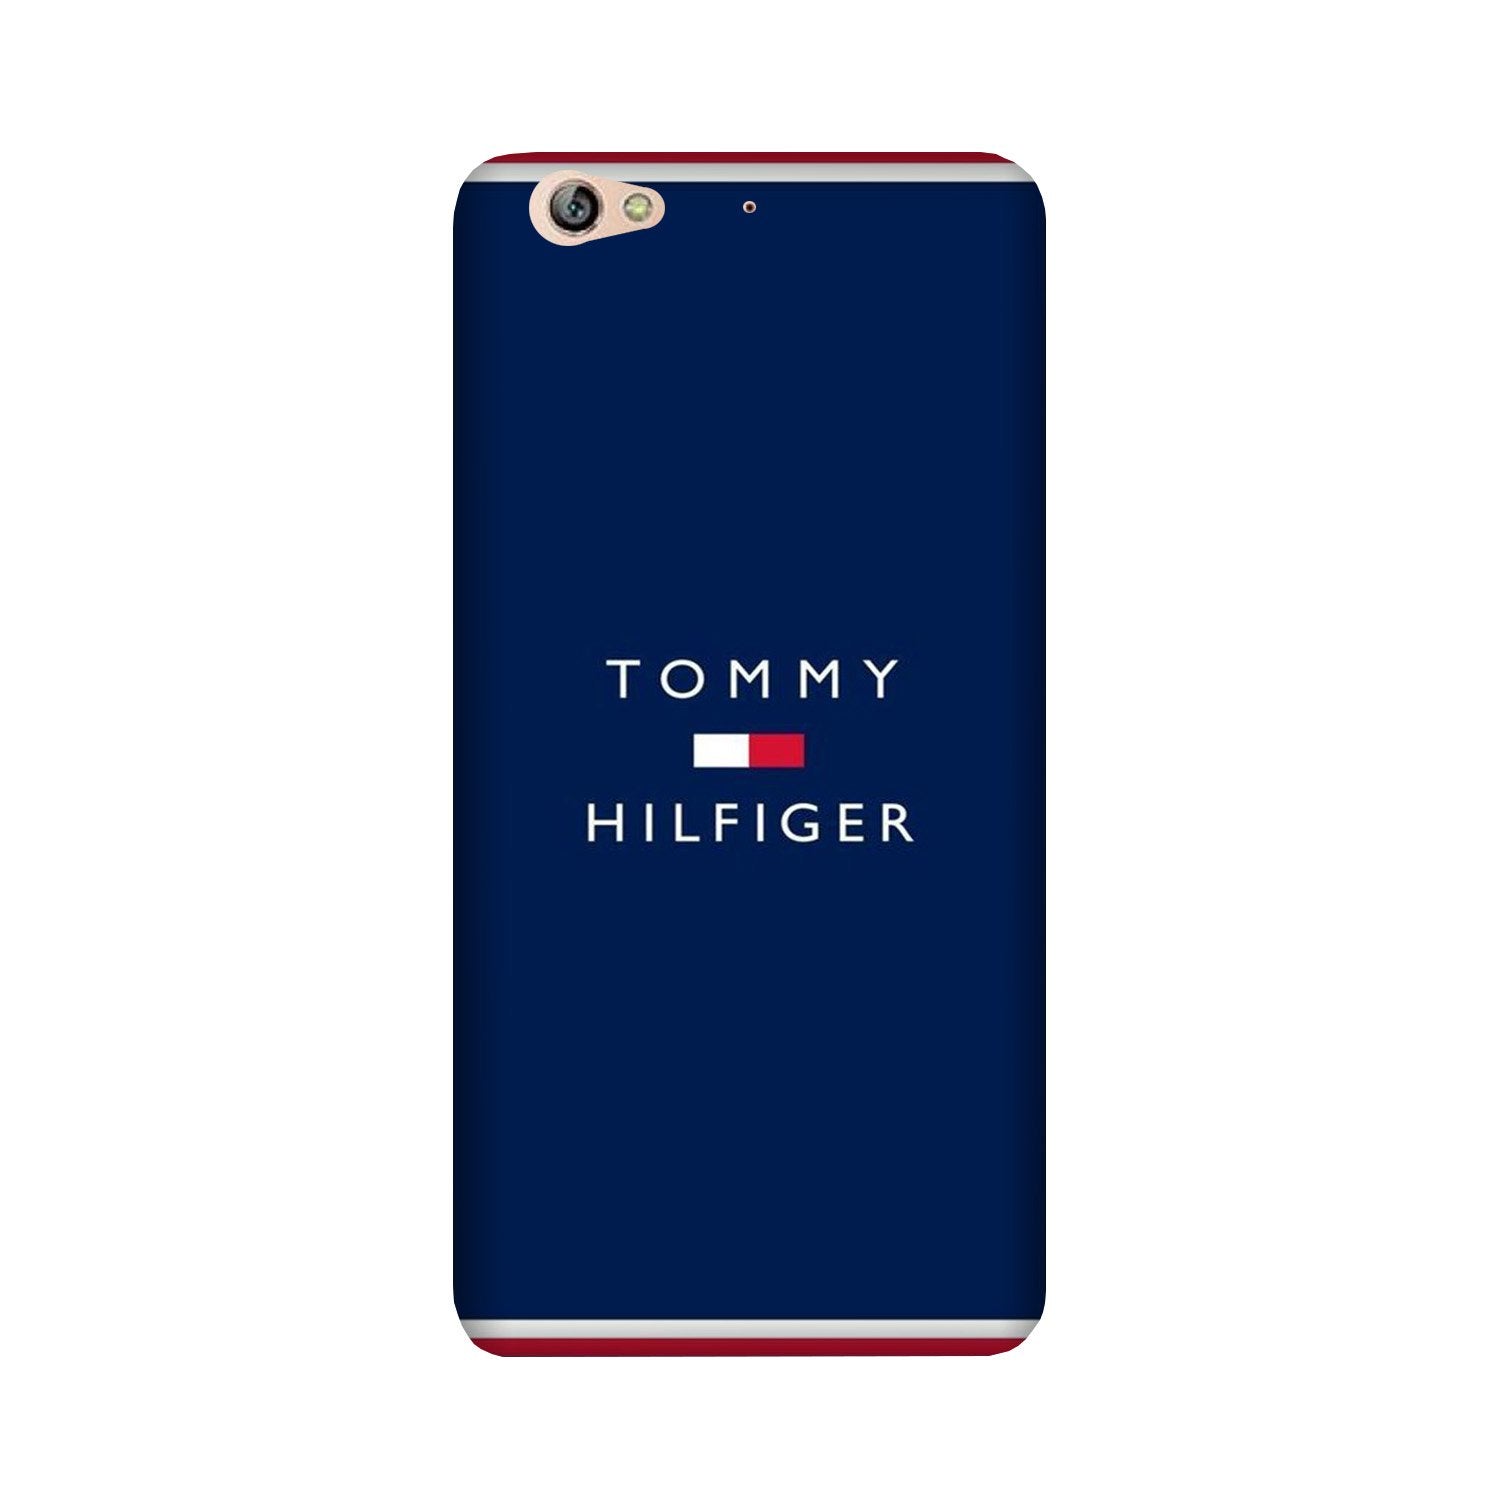 Tommy Hilfiger Case for Gionee S6 (Design No. 275)